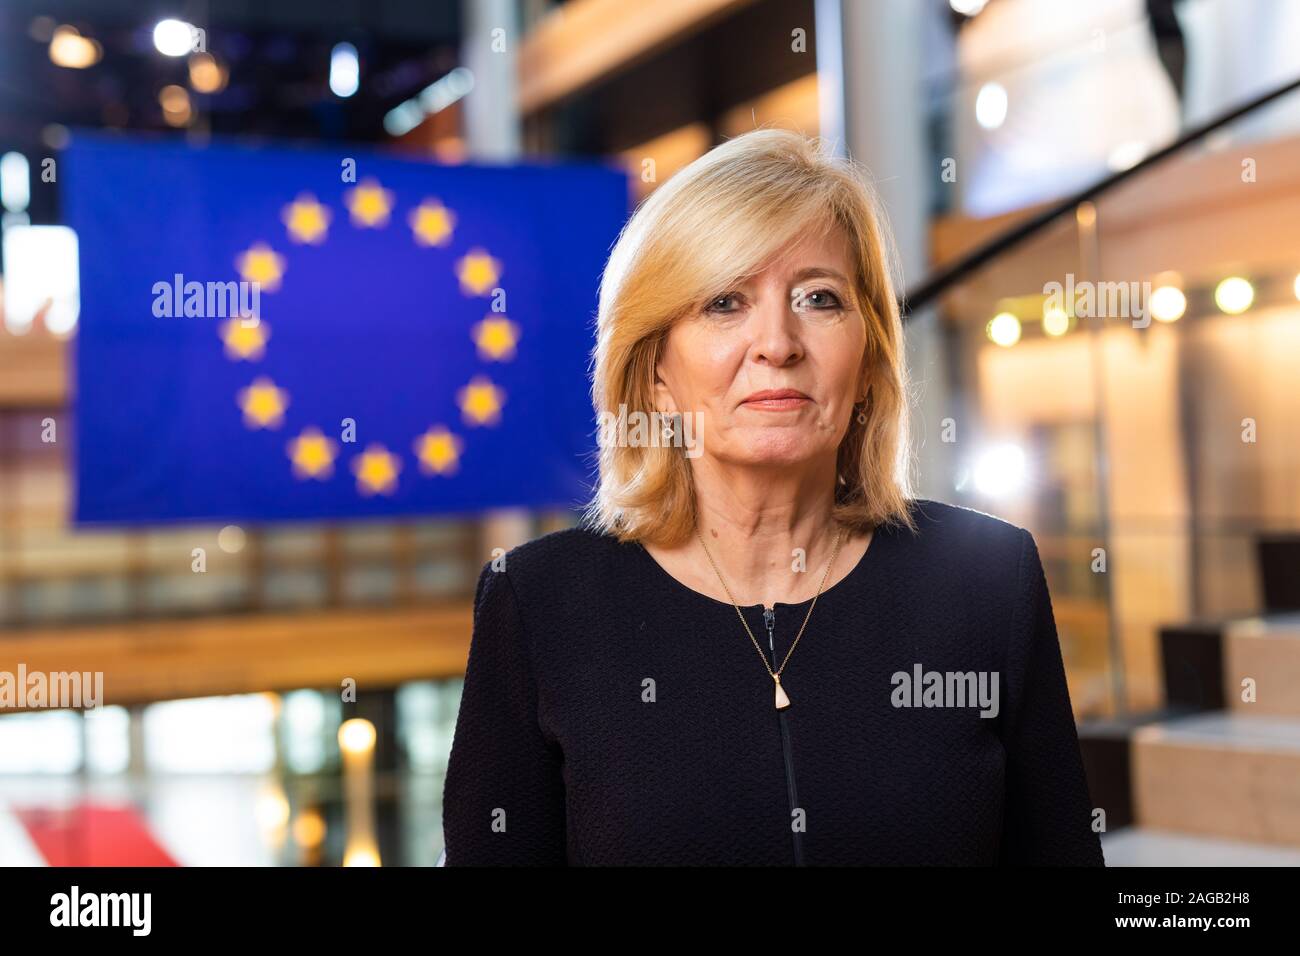 18 December 2019, France (France), Straßburg: Emily O'Reilly, European  Ombudsman, stands in the building of the European Parliament. O'Reilly has  held the office of EU Ombudswoman since 2013. Today (18.12.2019) she has